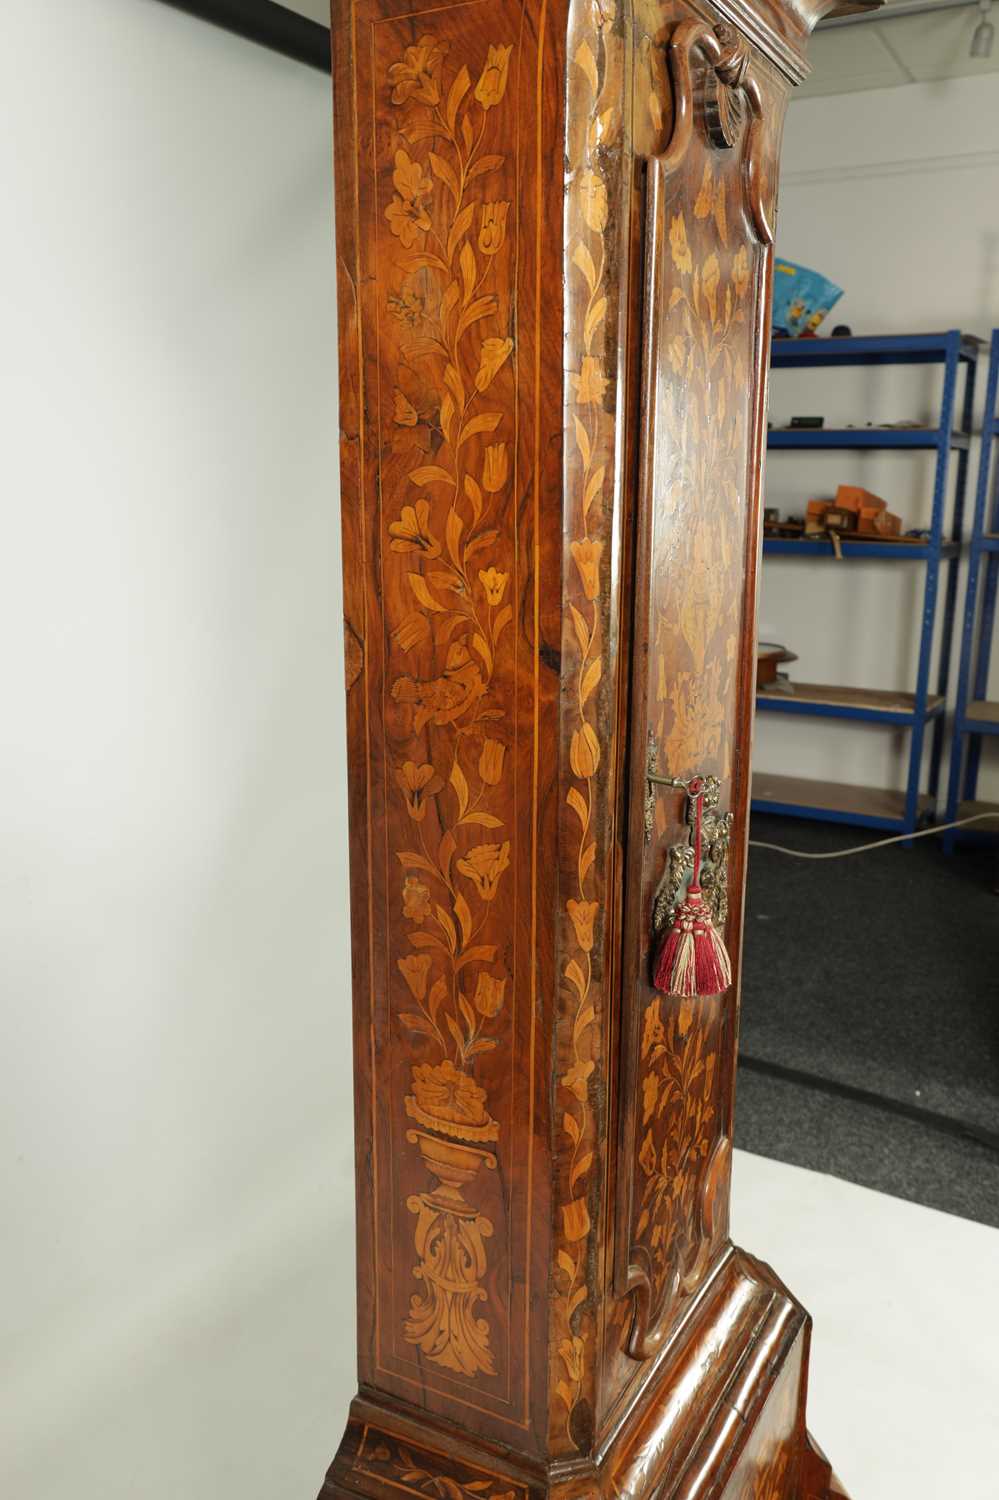 JOHN MARRIOTT, LONDON. A FINE 18TH CENTURY WALNUT AND DUTCH MARQUETRY 8-DAY LONG CASE CLOCK - Image 11 of 13